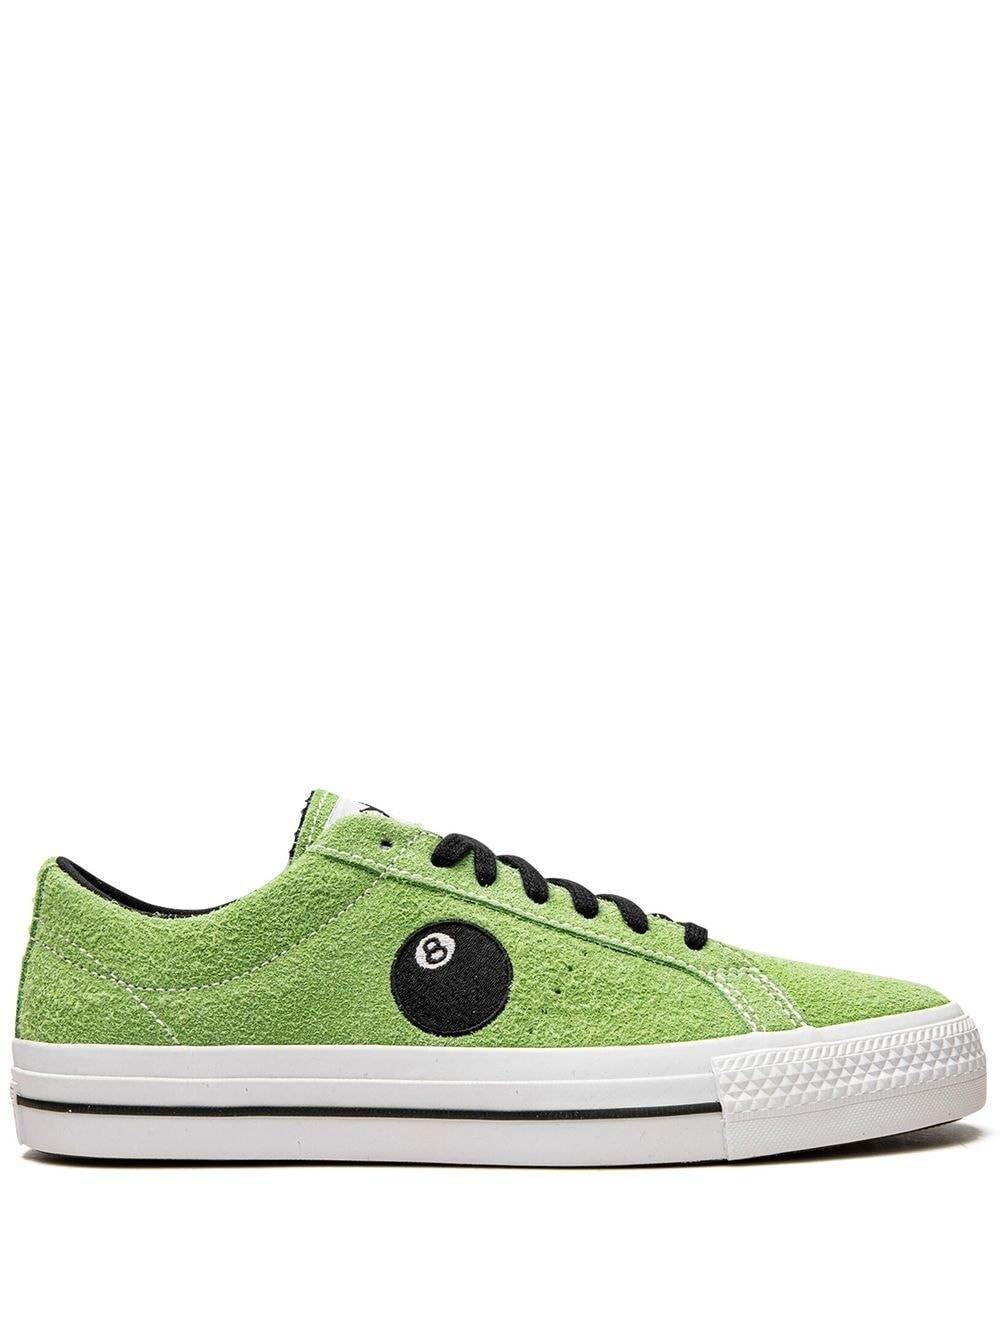 Converse X Stüssy One Star Pro "8-ball" Sneakers In Green